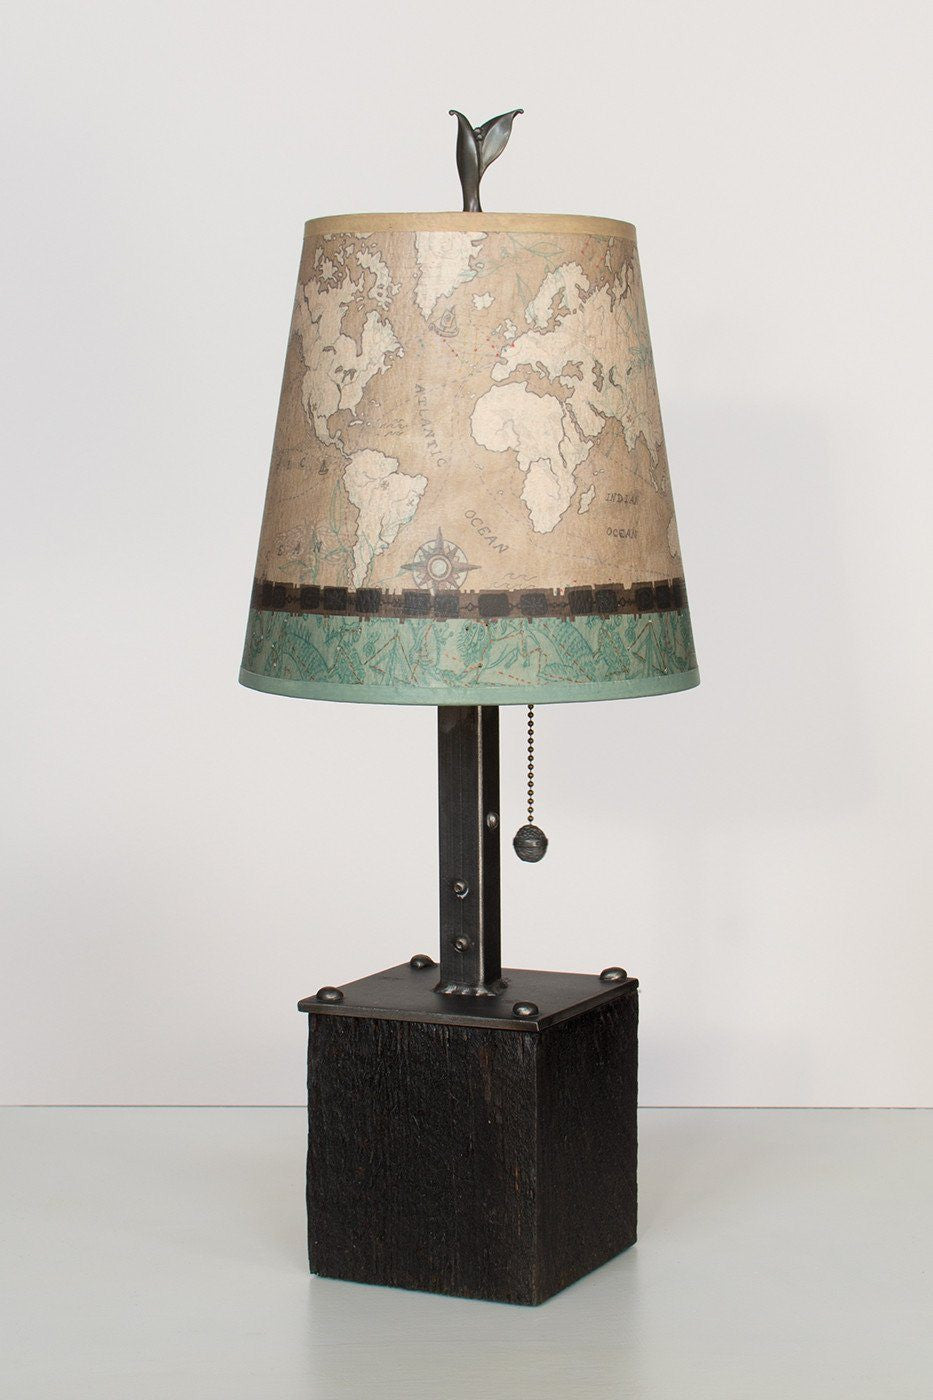 Janna Ugone &amp; Co Table Lamps Steel Table Lamp on Reclaimed Wood with Small Drum Shade in Voyages